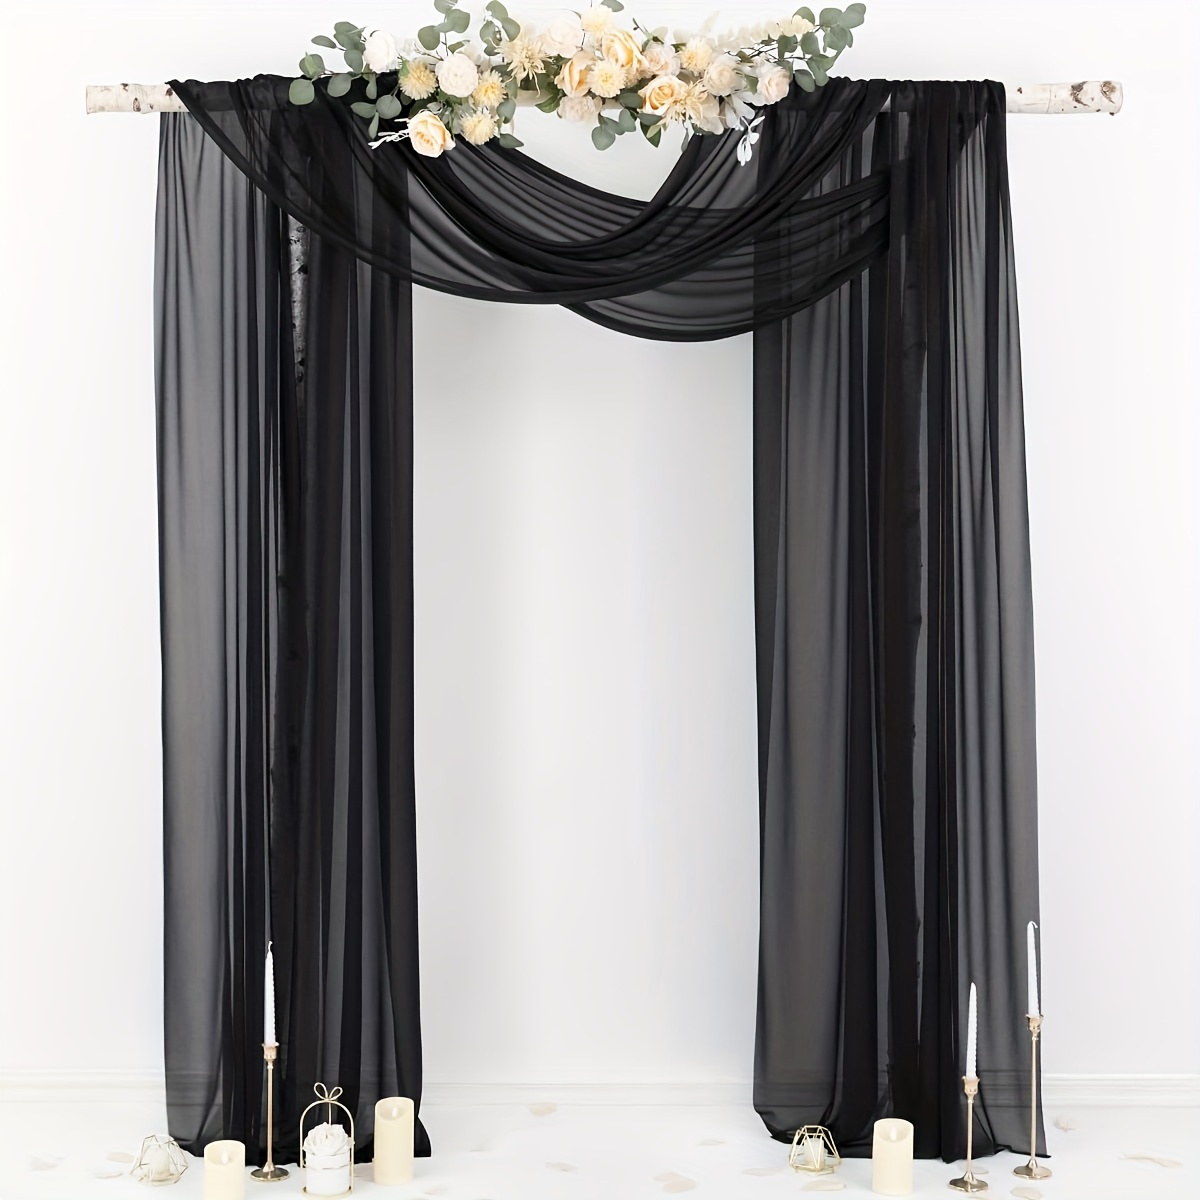 Reusable Arch Draping Fabric Curtain Drapery Scarves for Wedding